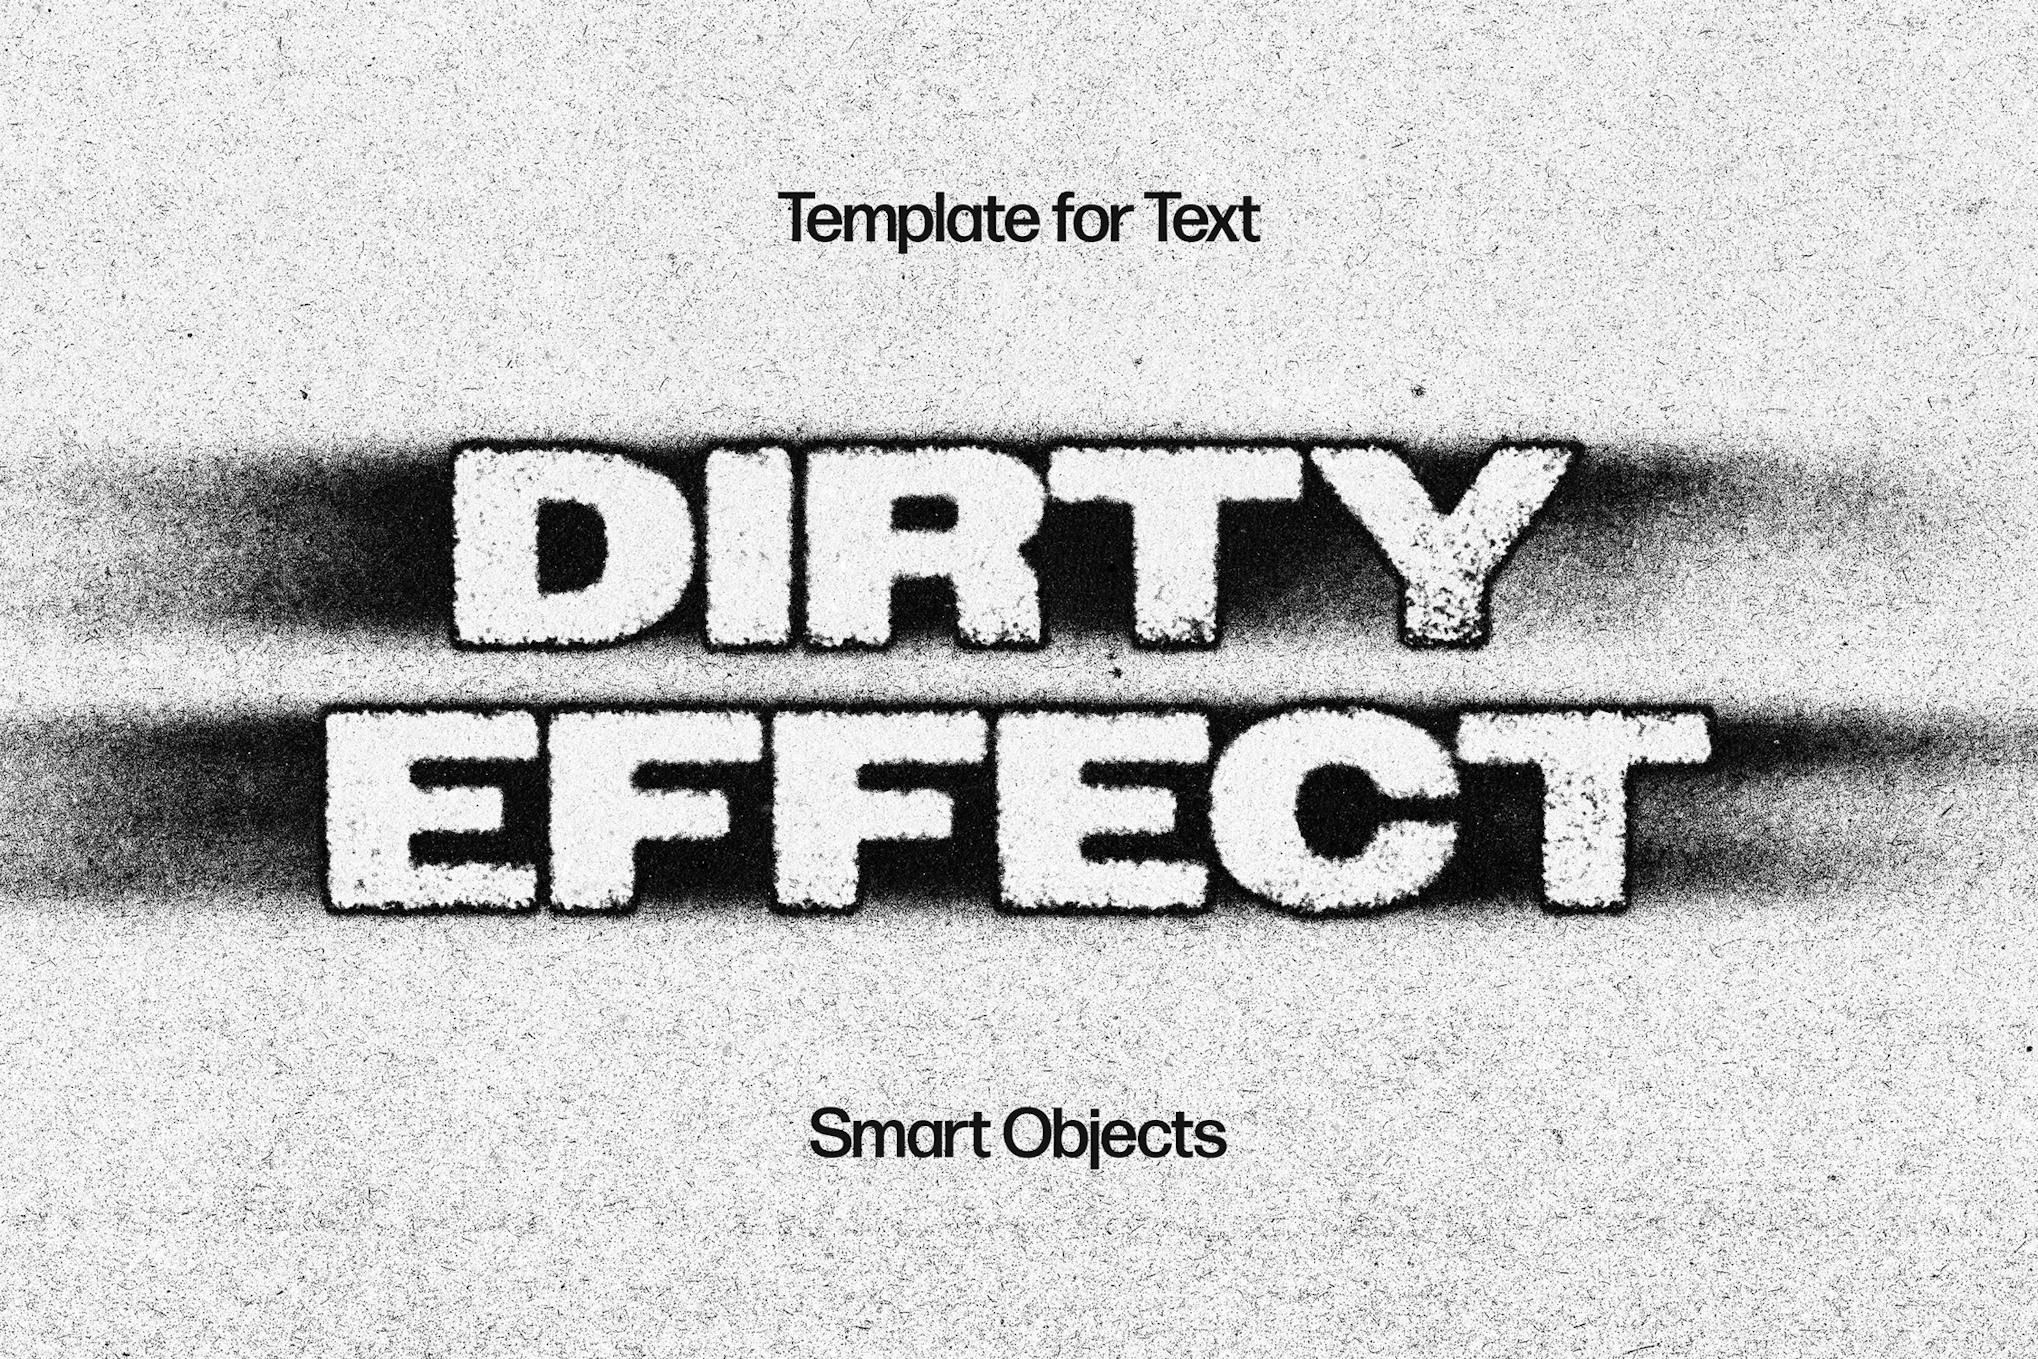 Dirty Text Effect PSD for Photoshop